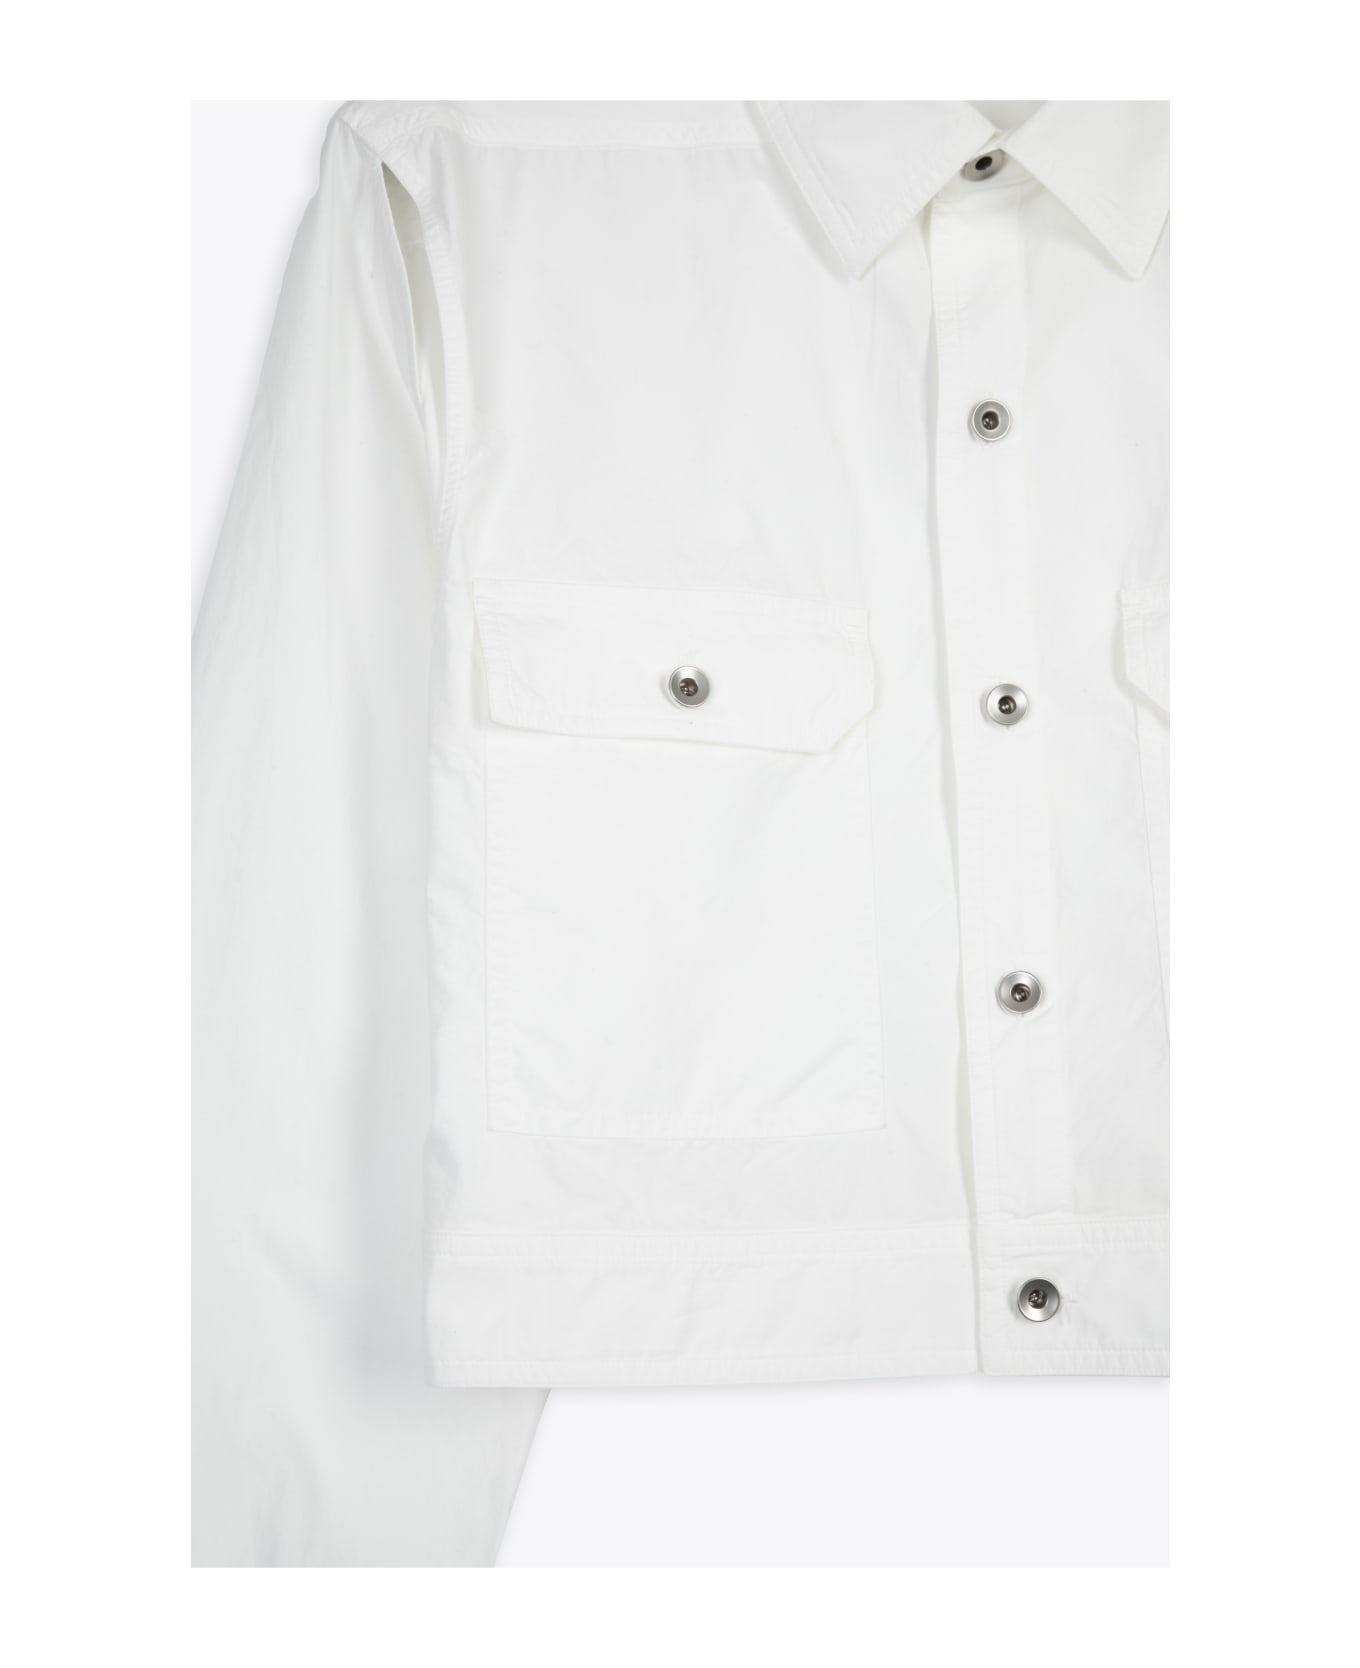 DRKSHDW Cape Sleeve Cropped Outershirt White Poplin Cotton Outershirt - Cape Sleeve Cropped Outershirt - White ジャケット